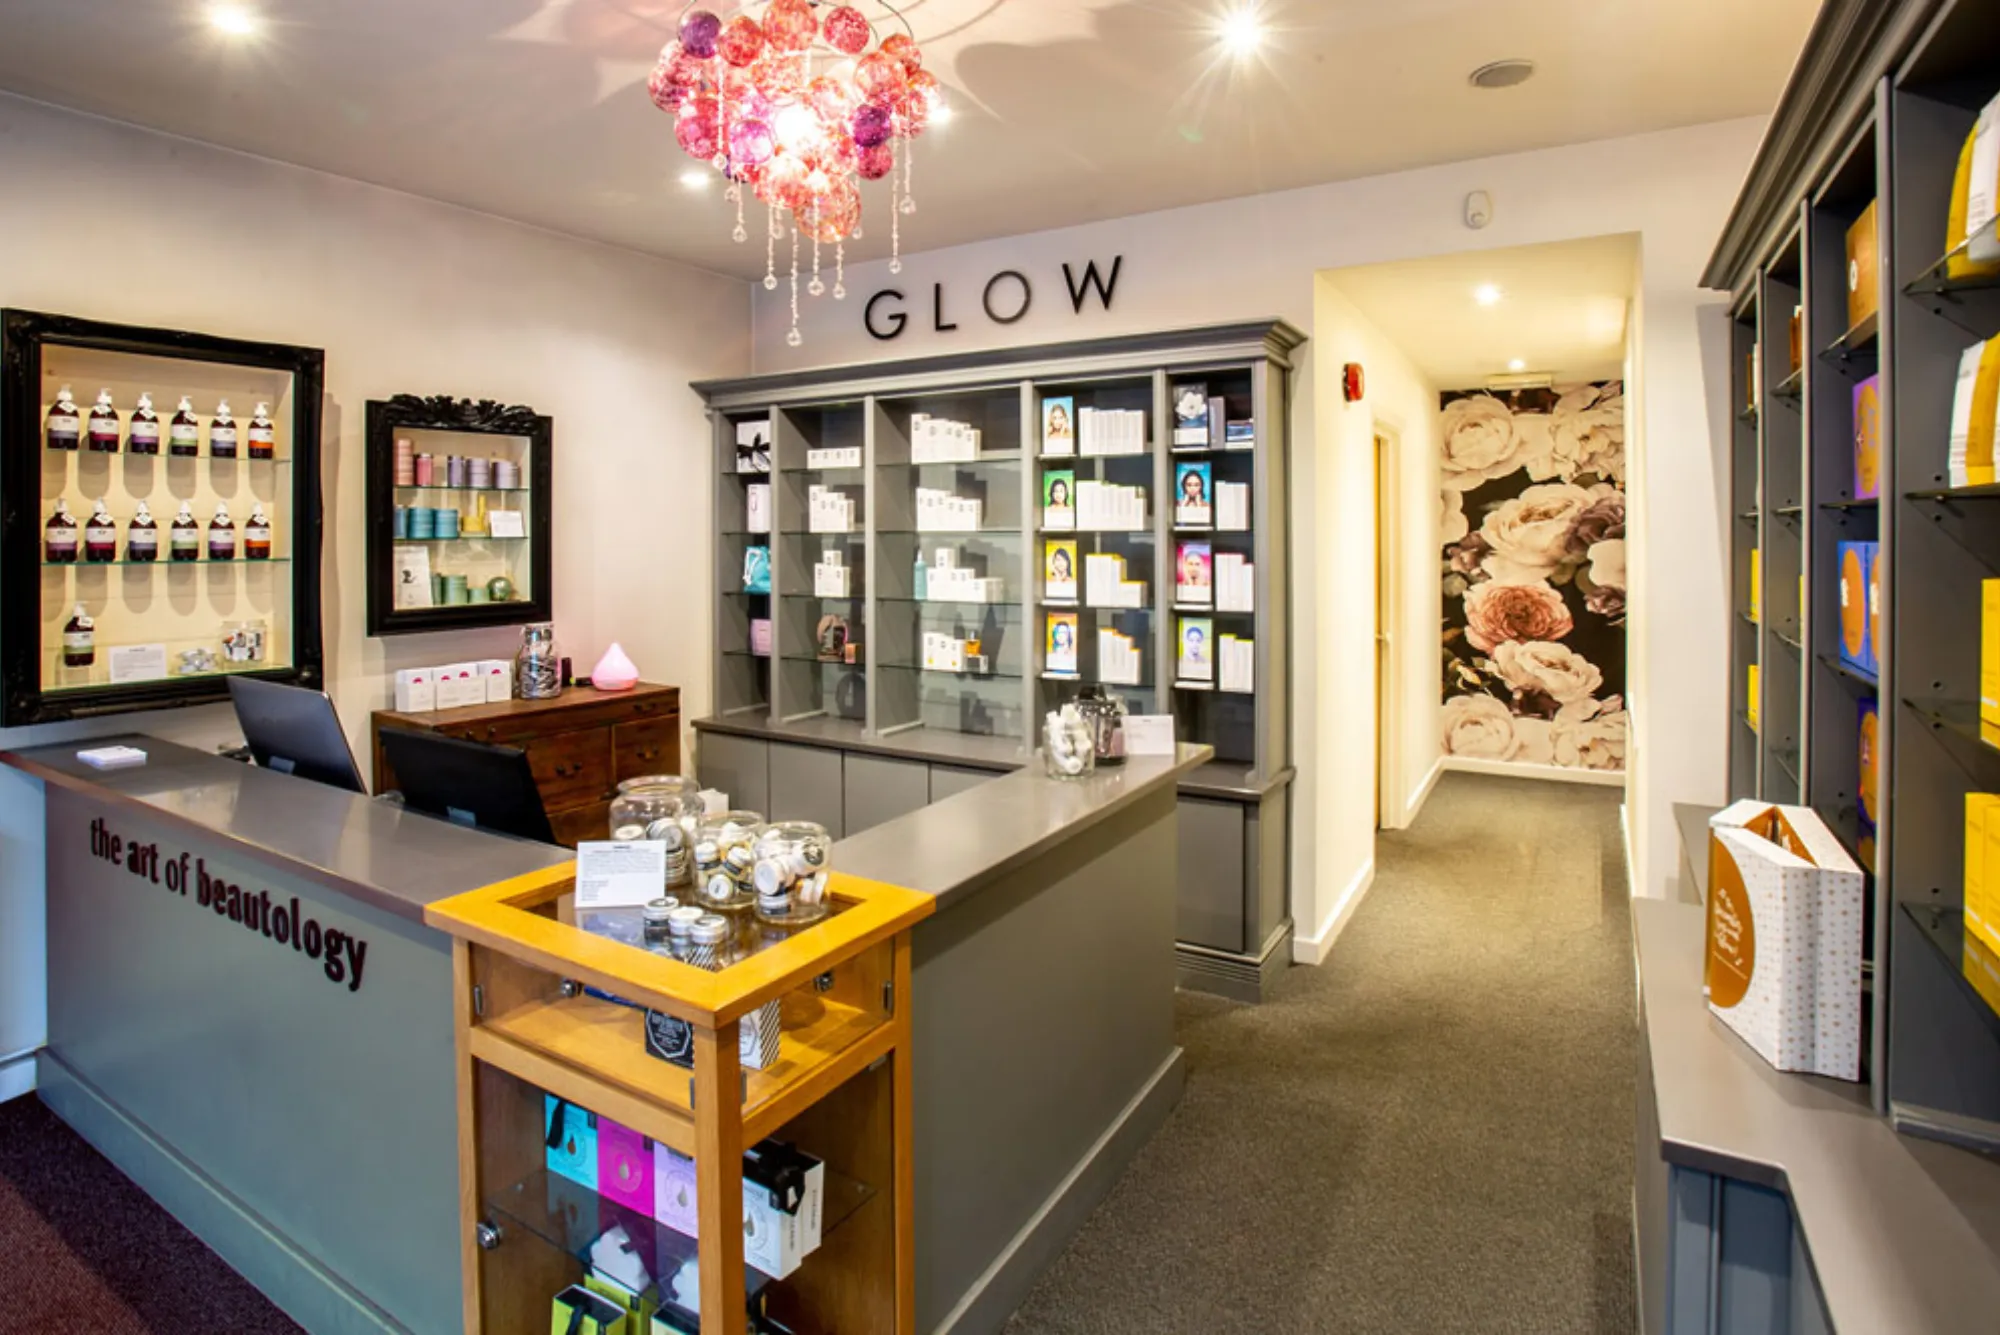 Discover the Best Services at Glow Beauty Salon